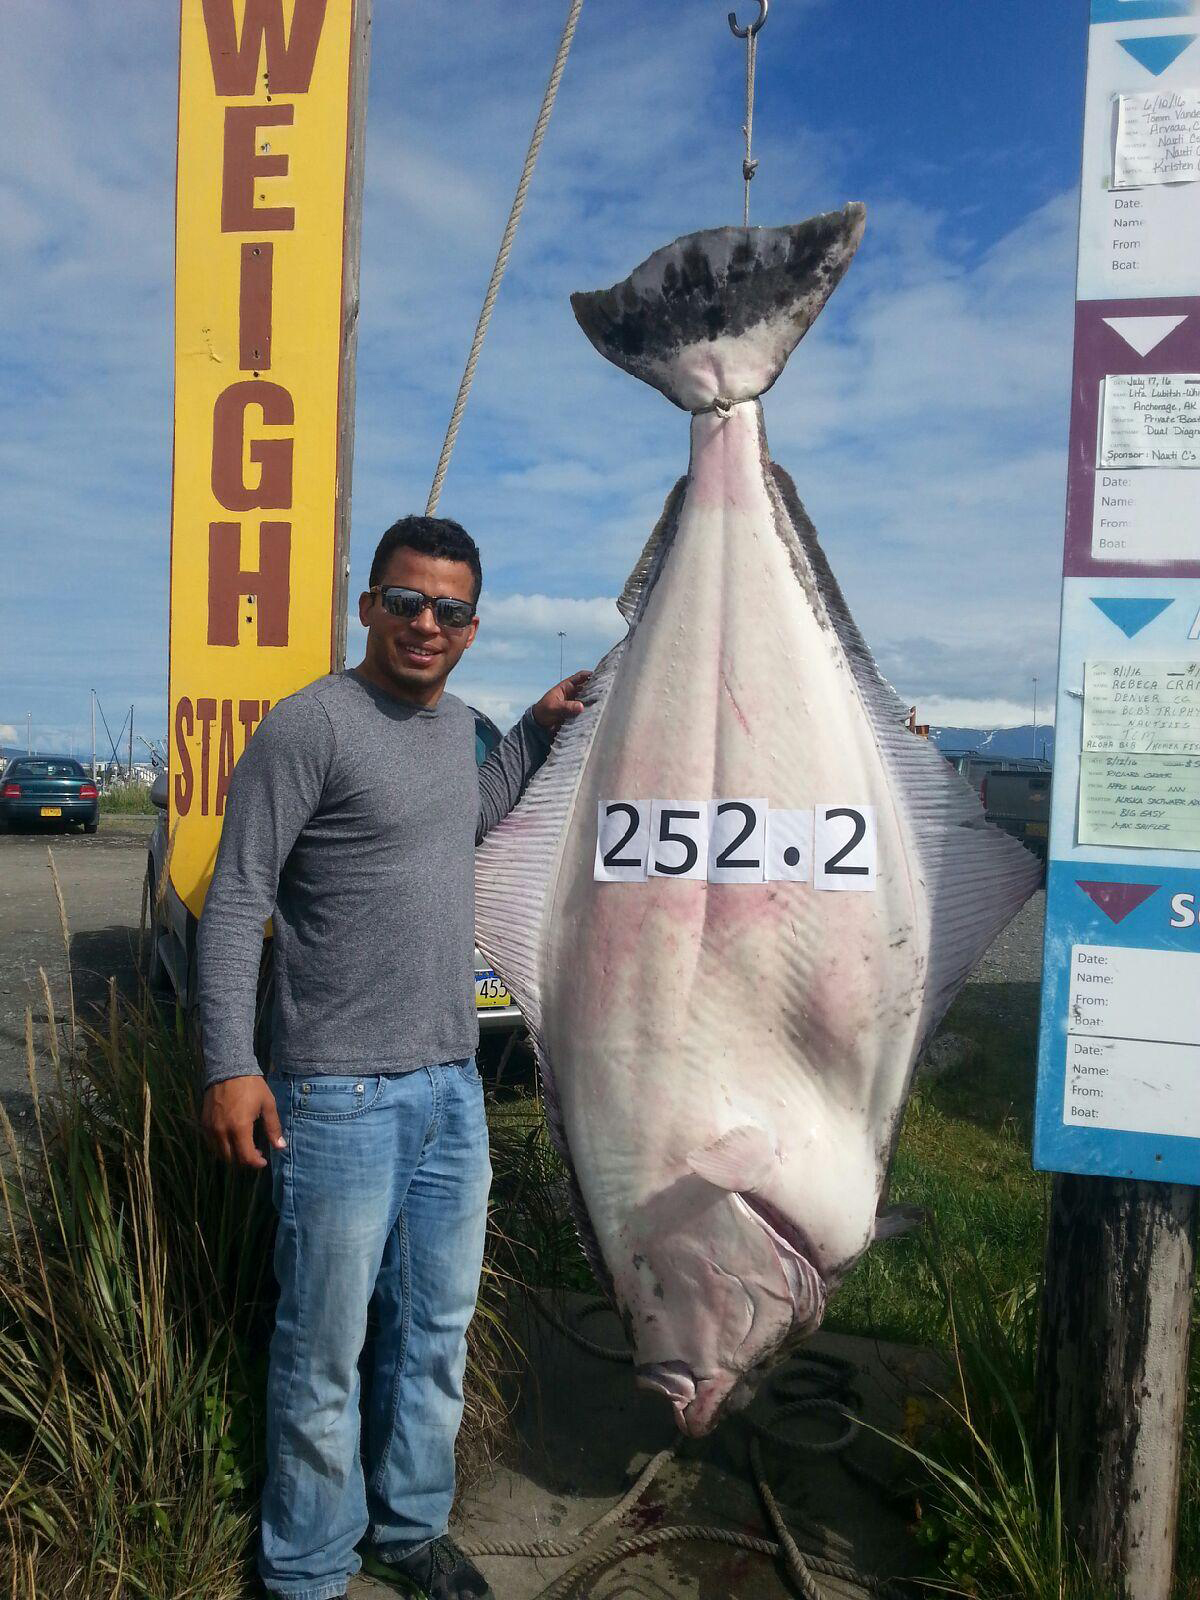 Austin Nelson of North Pole caught his 252.2-pound halibut on Aug. 16, beat out the prior derby leader by a mere 1.2 pounds. He now will make upwards of $15,000 on his lucky catch.